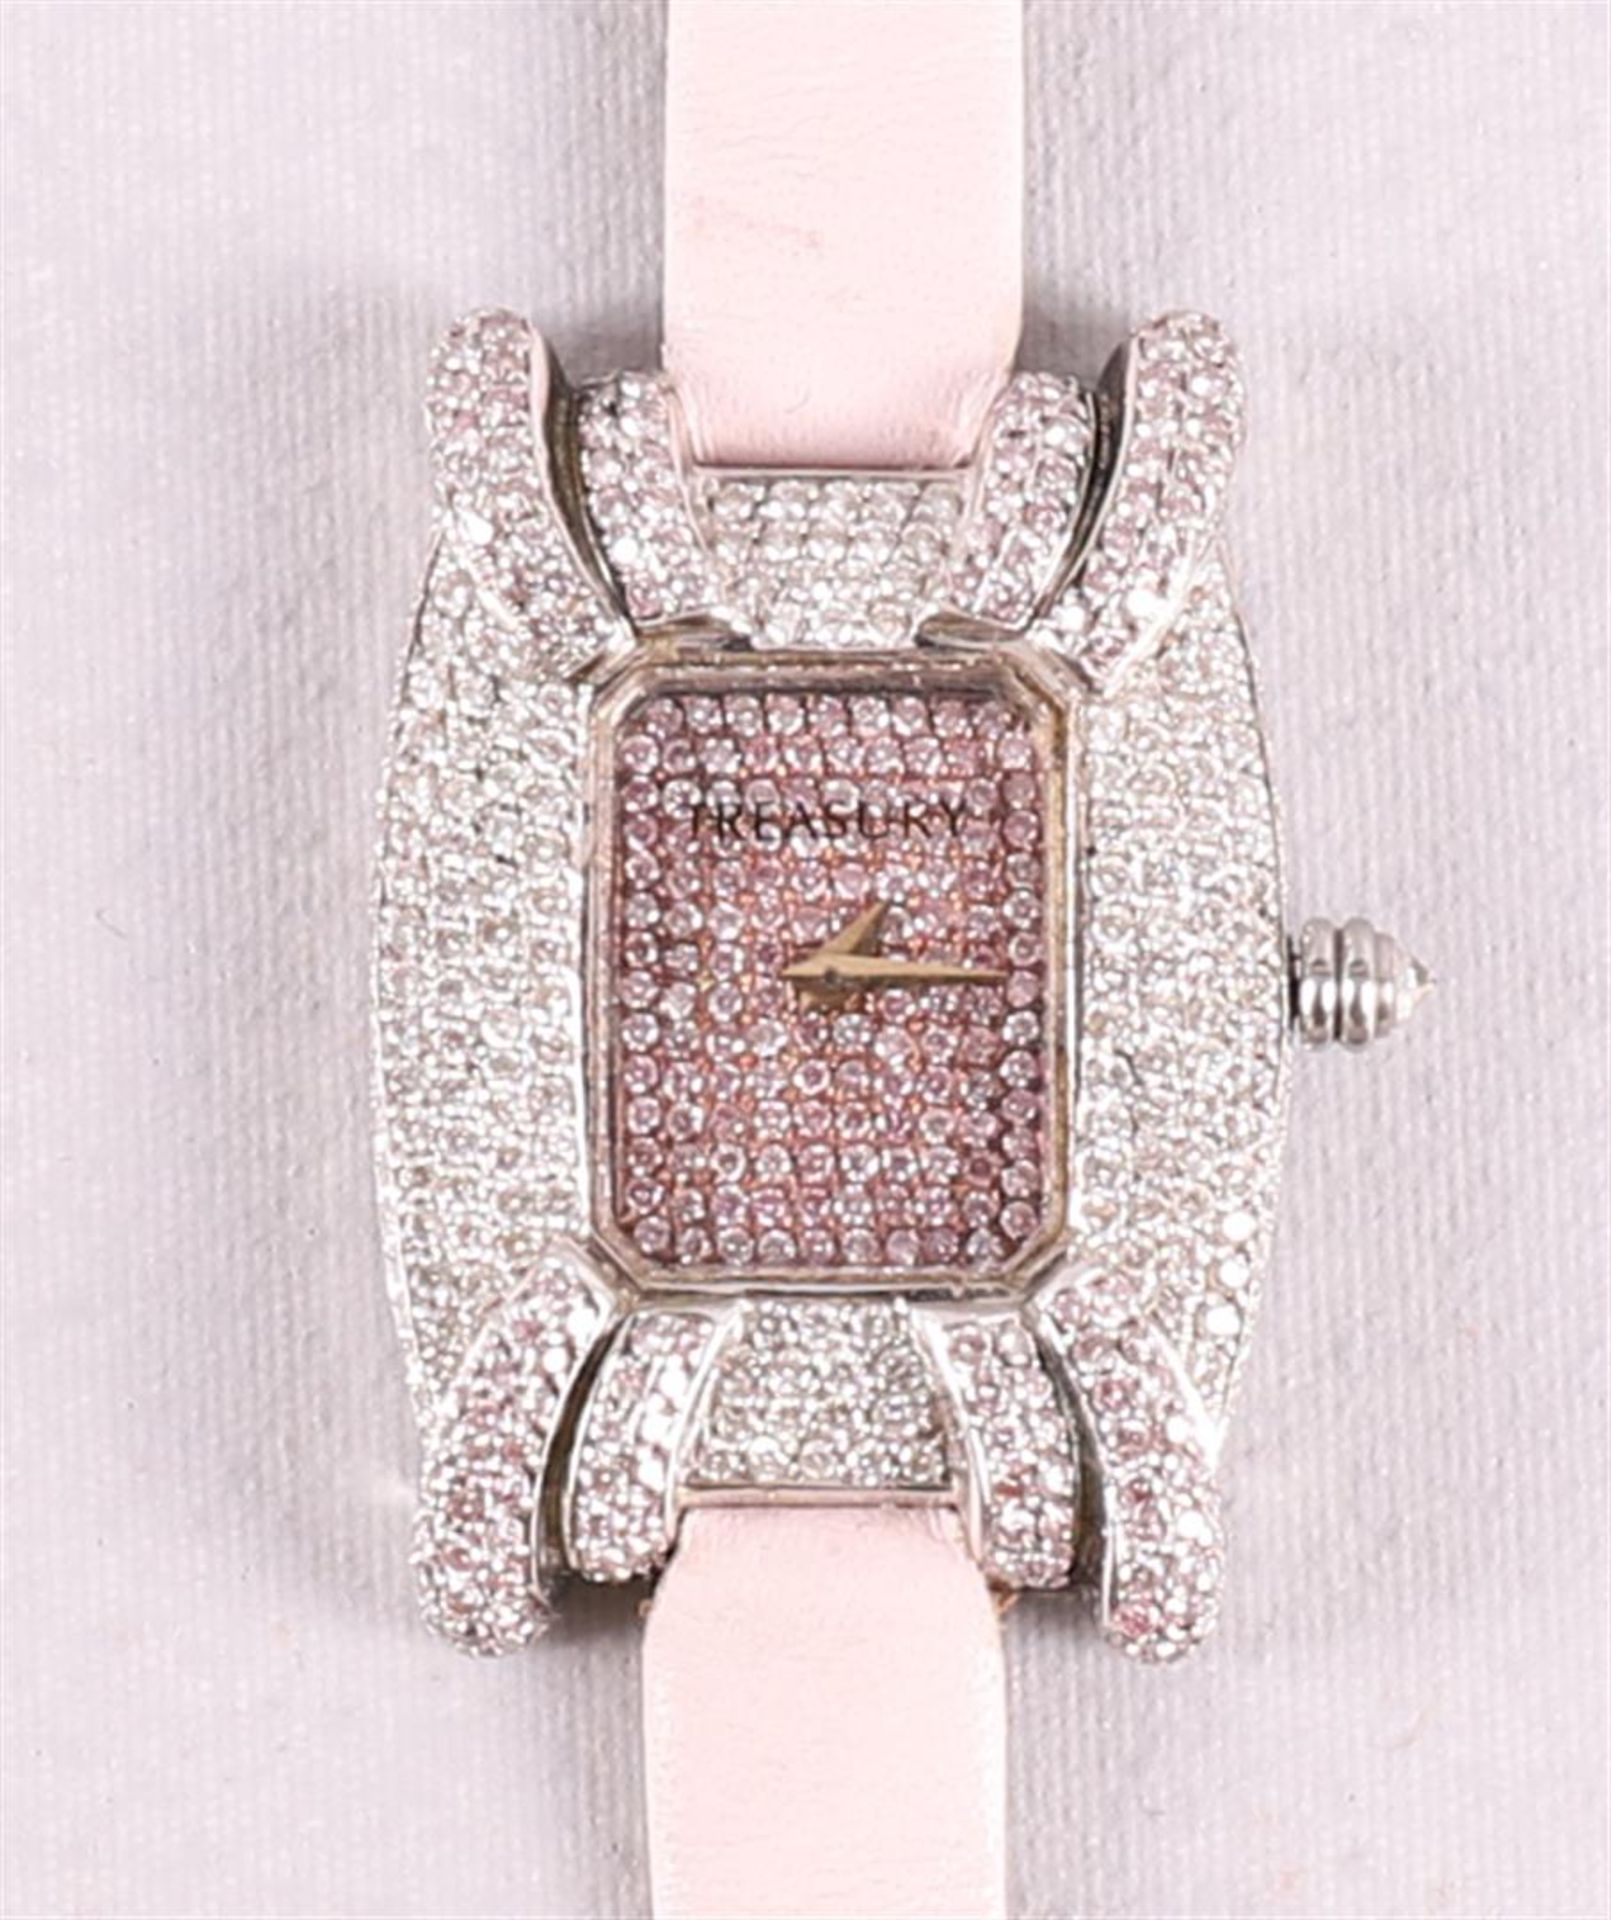 A Treasury women's wristwatch with an entourage of many brilliants, on a pink leather strap. The - Image 2 of 4